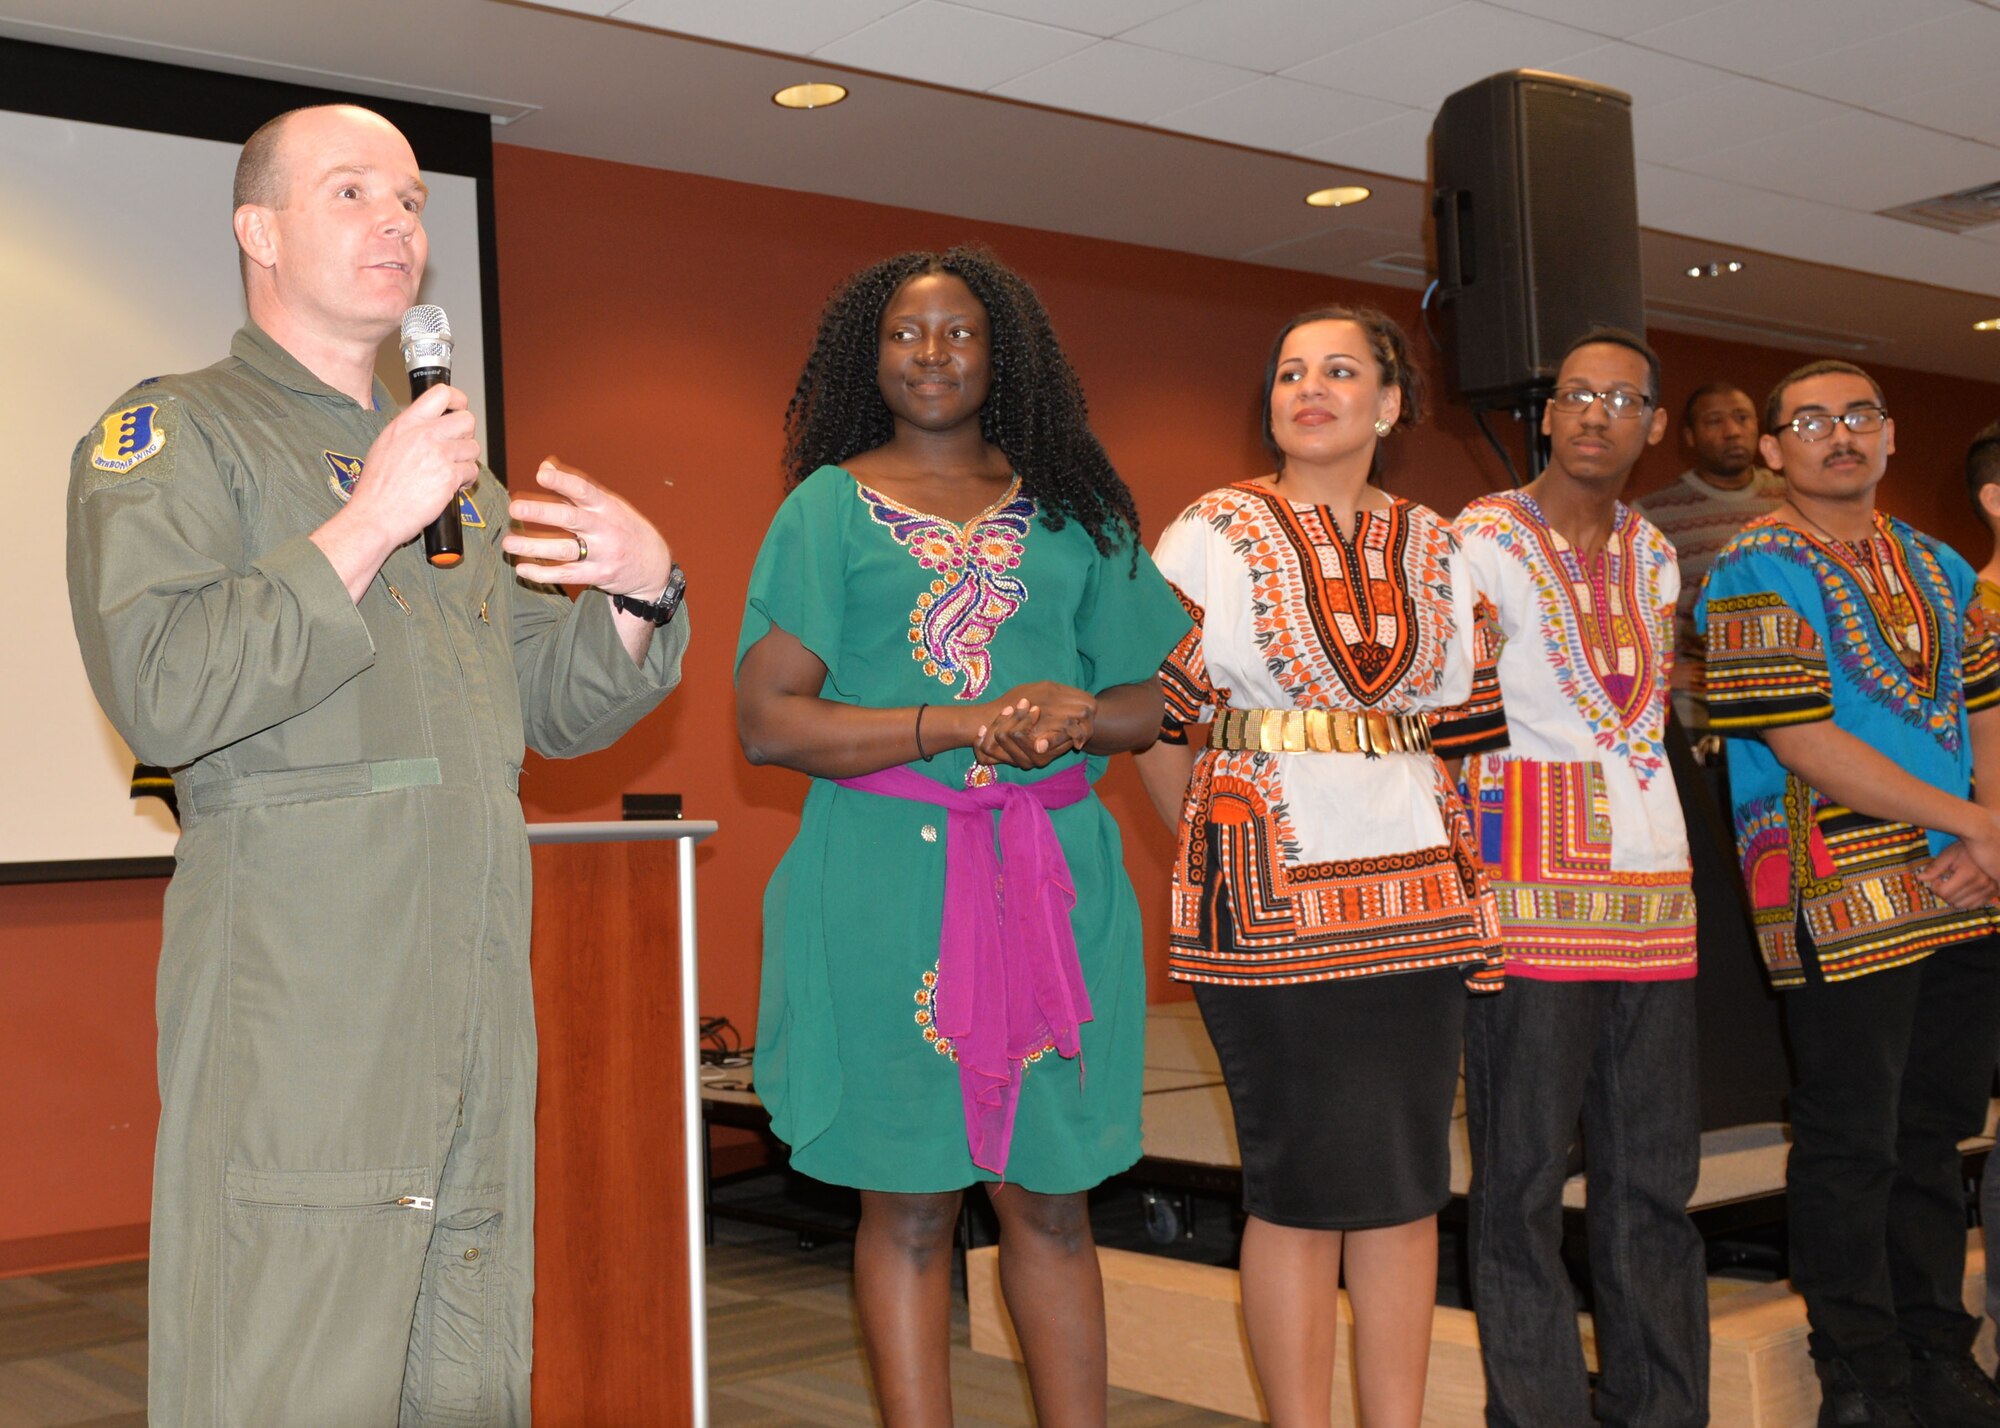 Lt. Col. Nathan Barrett, the 28th Bomb Wing director of staff, gives closing remarks during a cultural exposé at Ellsworth Air Force Base, S.D., Feb. 23, 2018. The Diversity Council is planning more events to spread cultural awareness among the base’s Airmen. (U.S. Air Force photo by Senior Airman Michella T. Stowers)